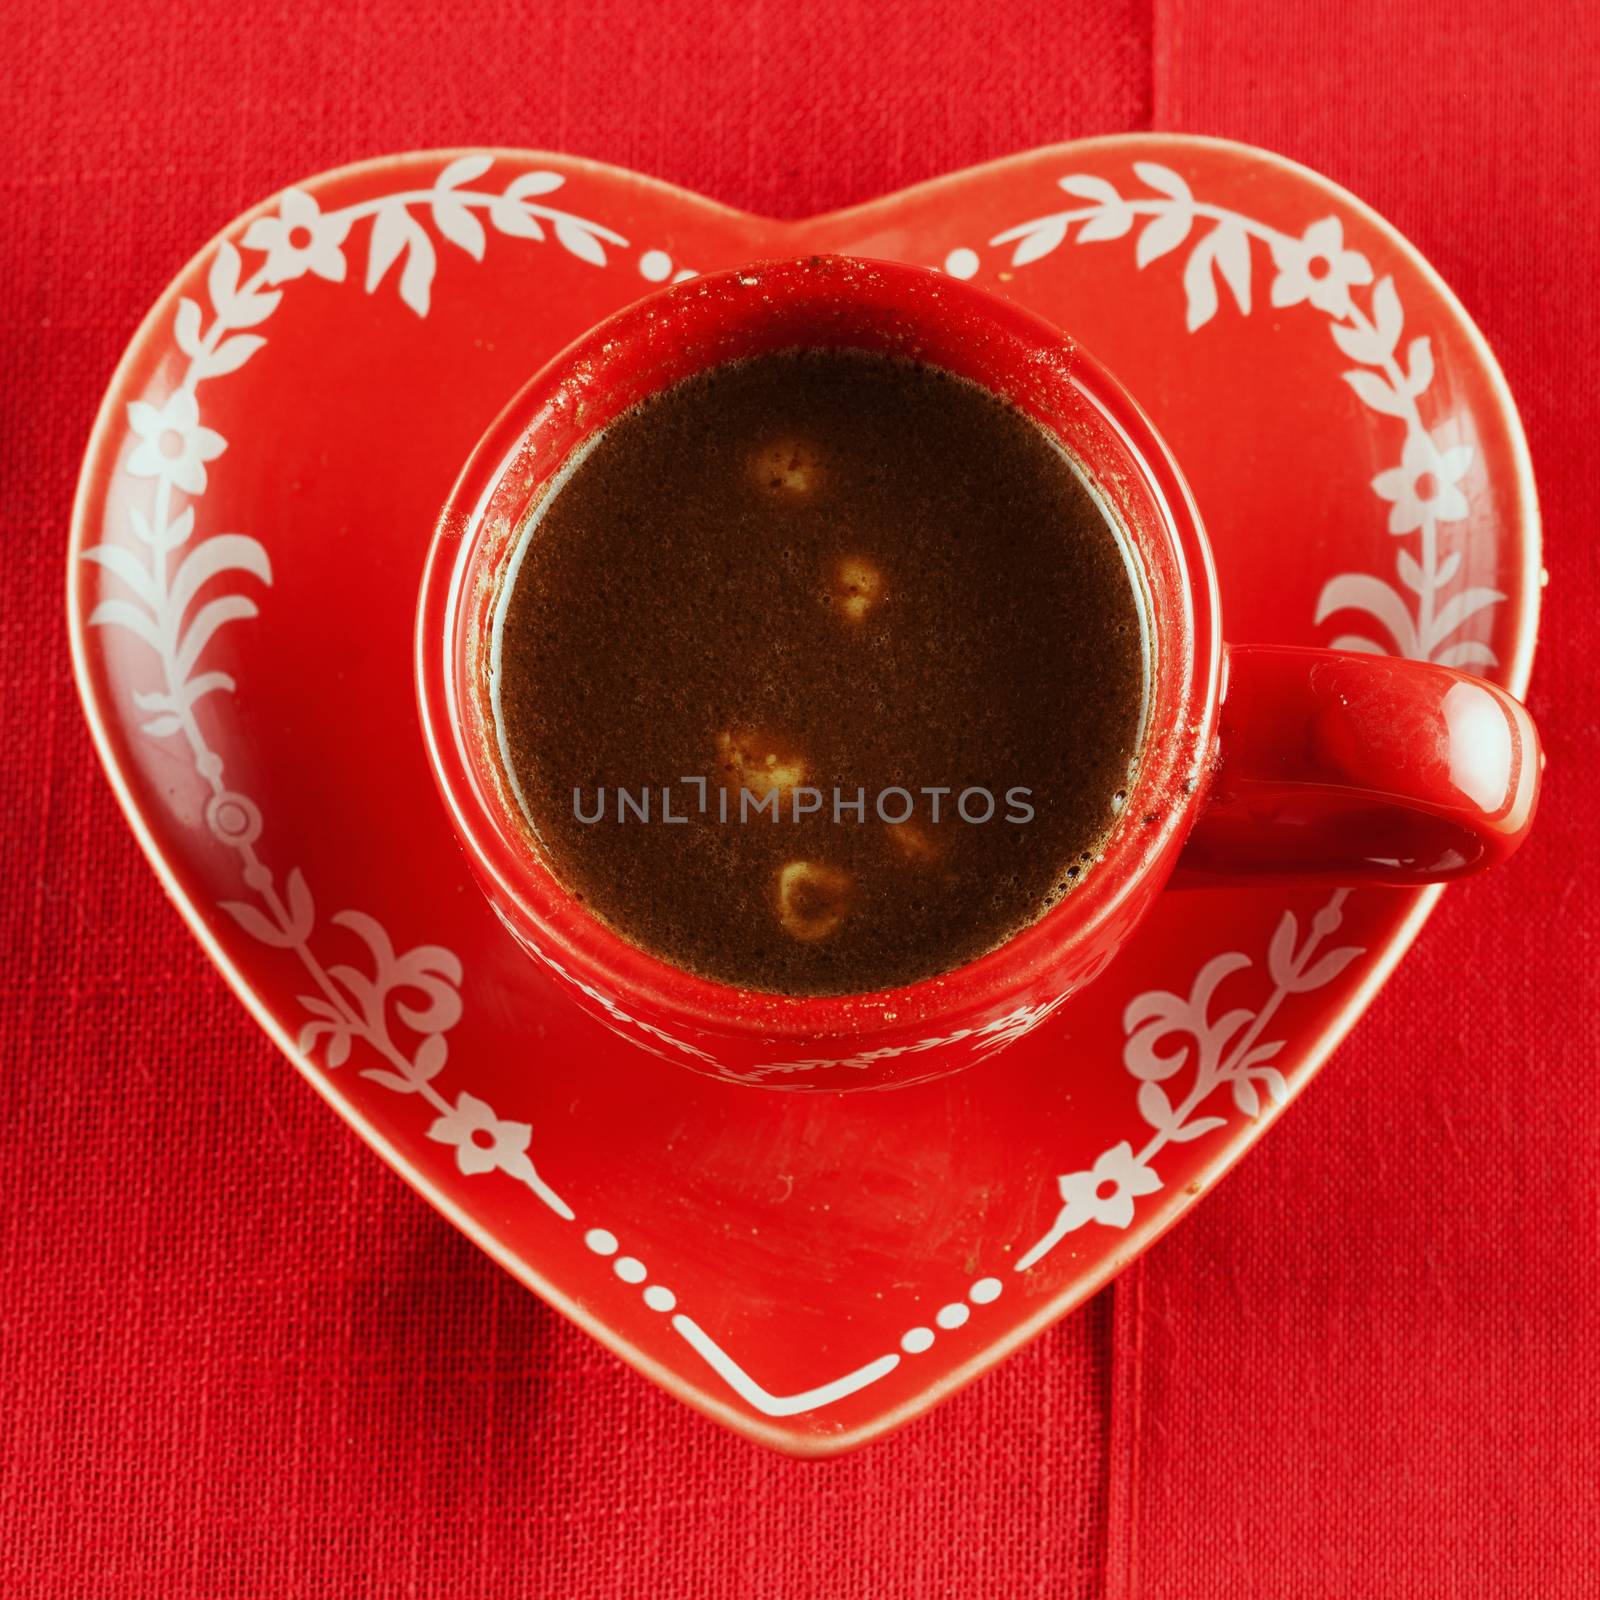 Chocolate and hazelnuts in red cup, over red cloth